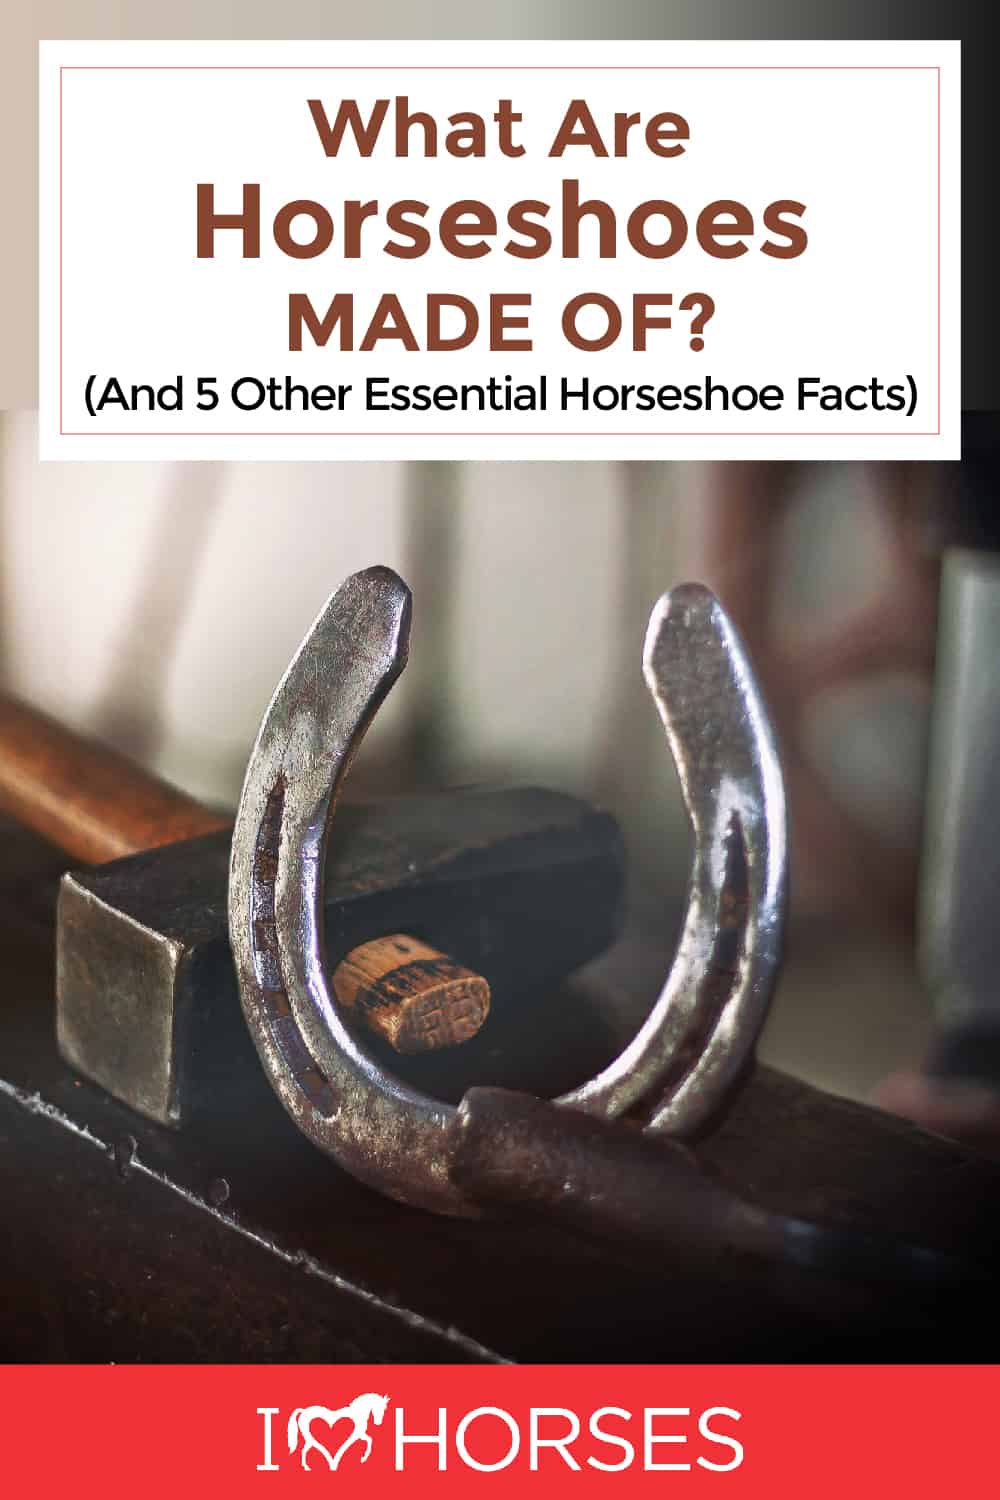 6 Essential Things To Know About Horseshoes